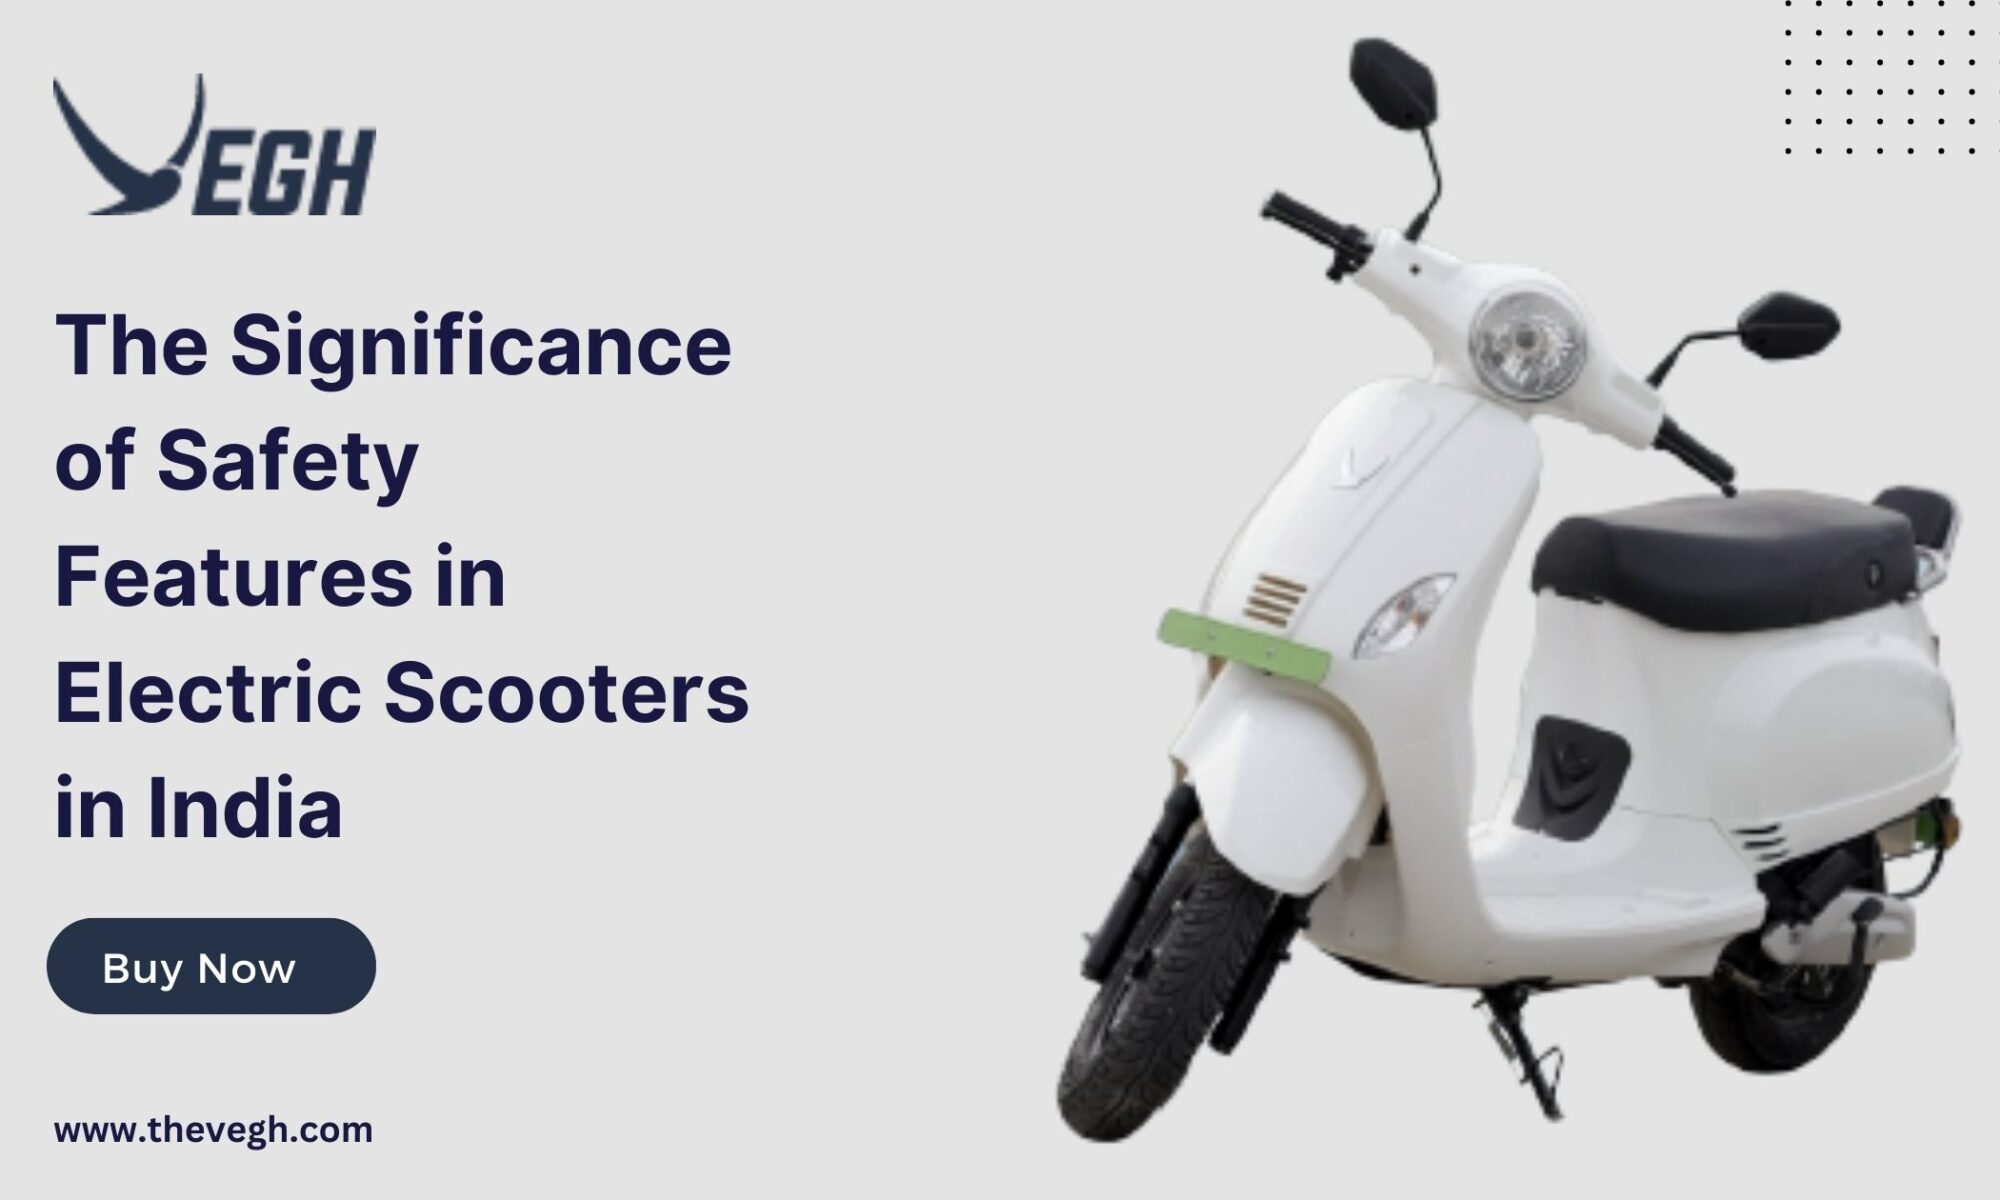 The Significance of Safety Features in electric scooters in India